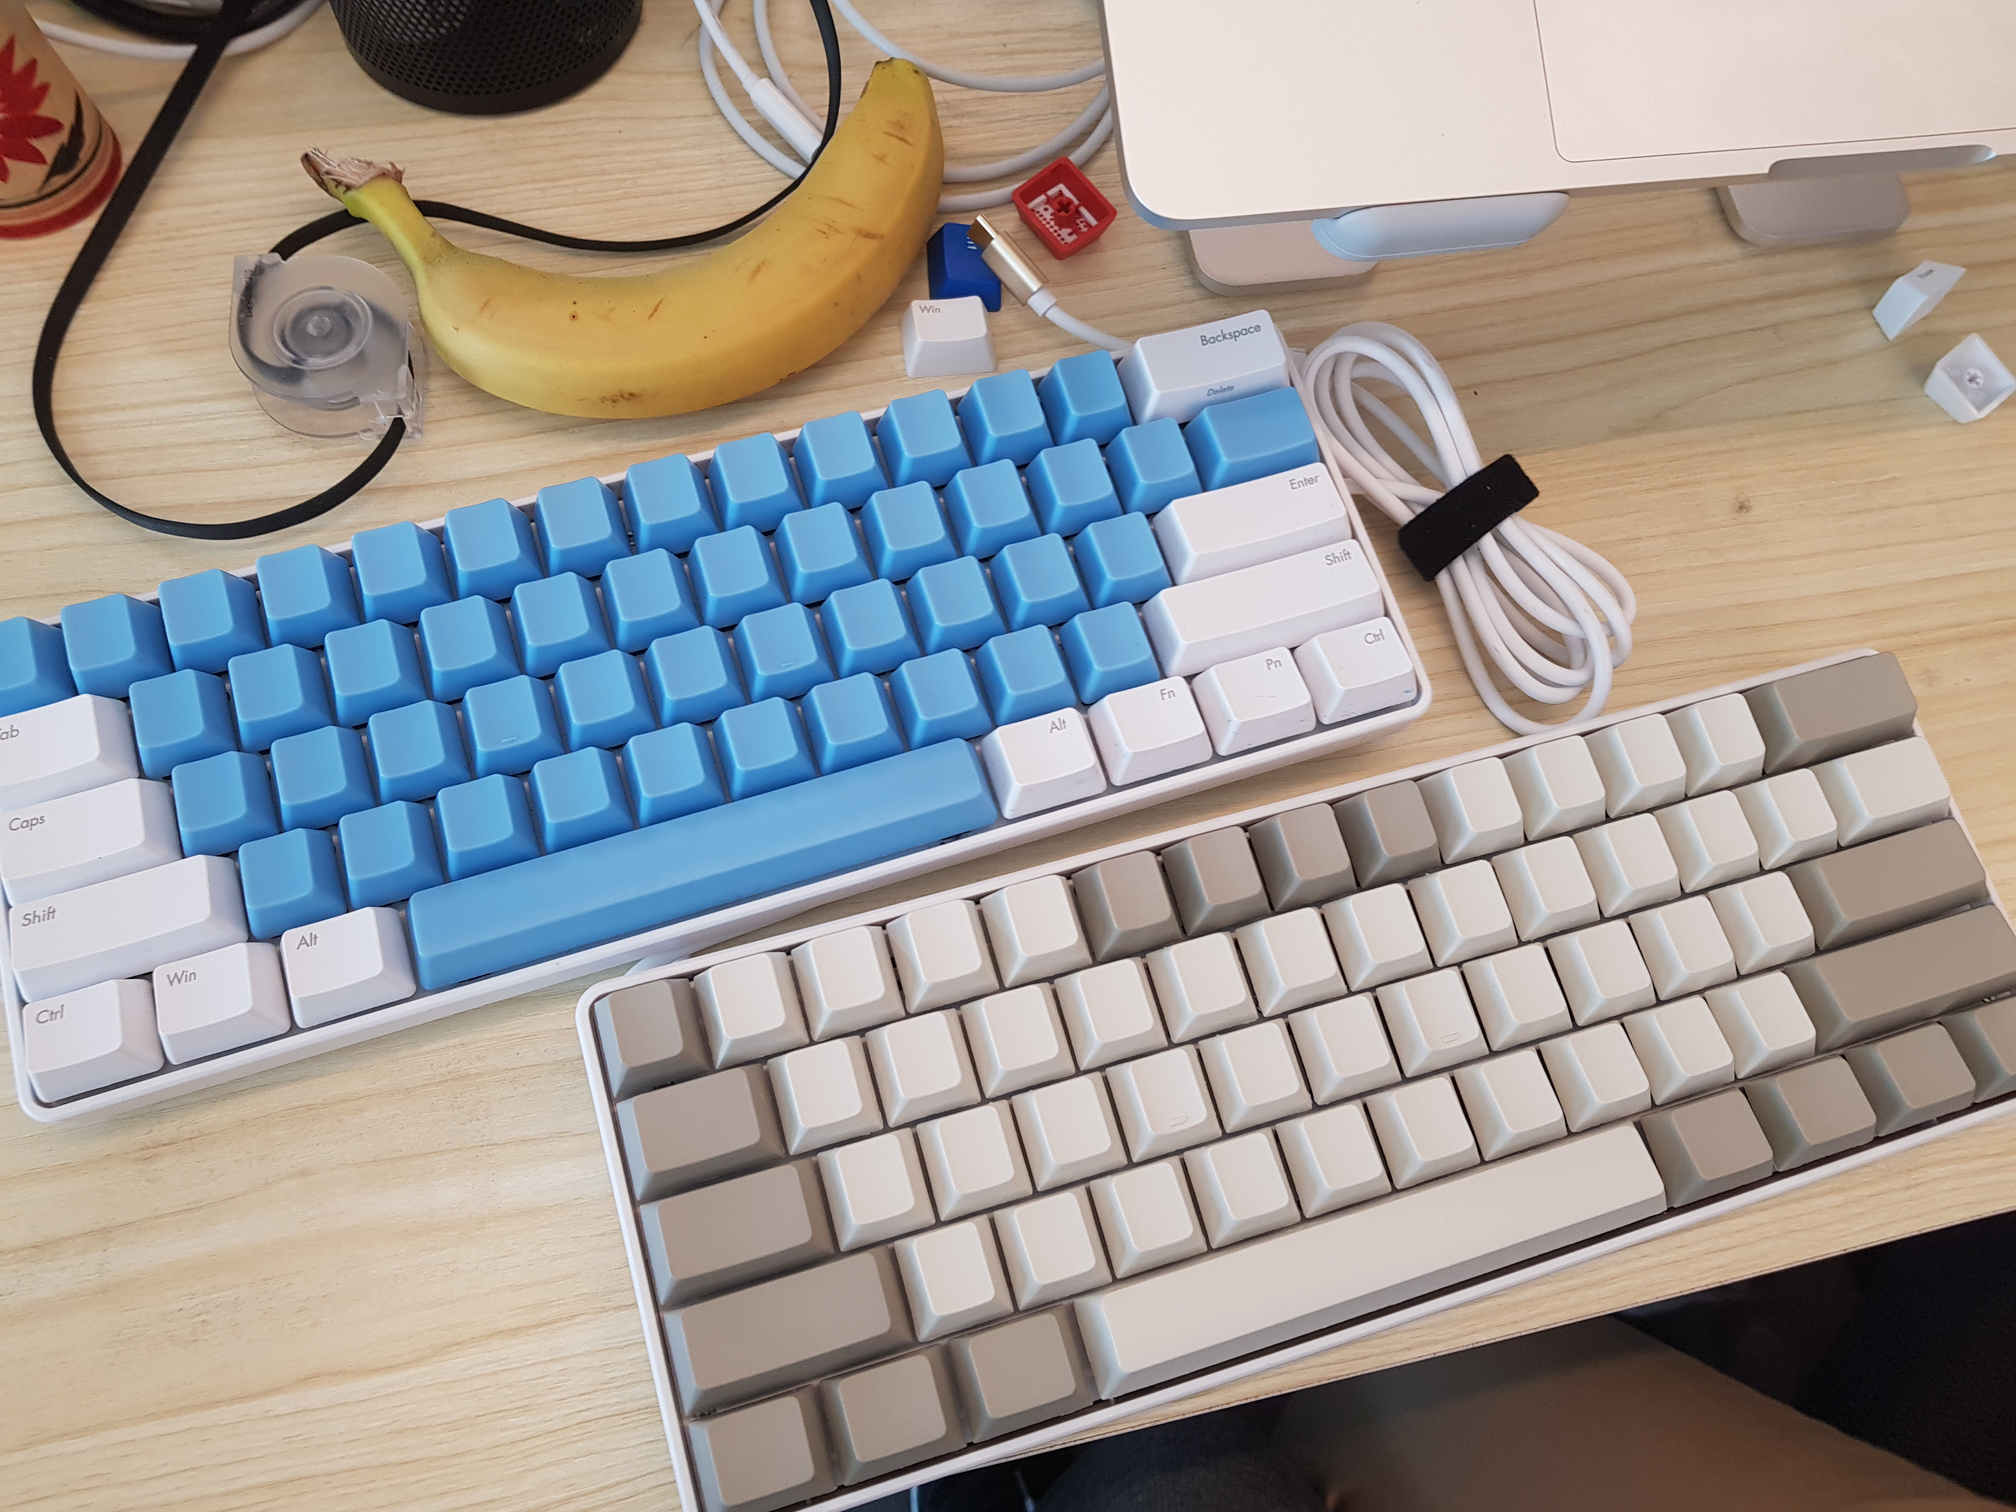 poker2 HHKB keyboard with no letters